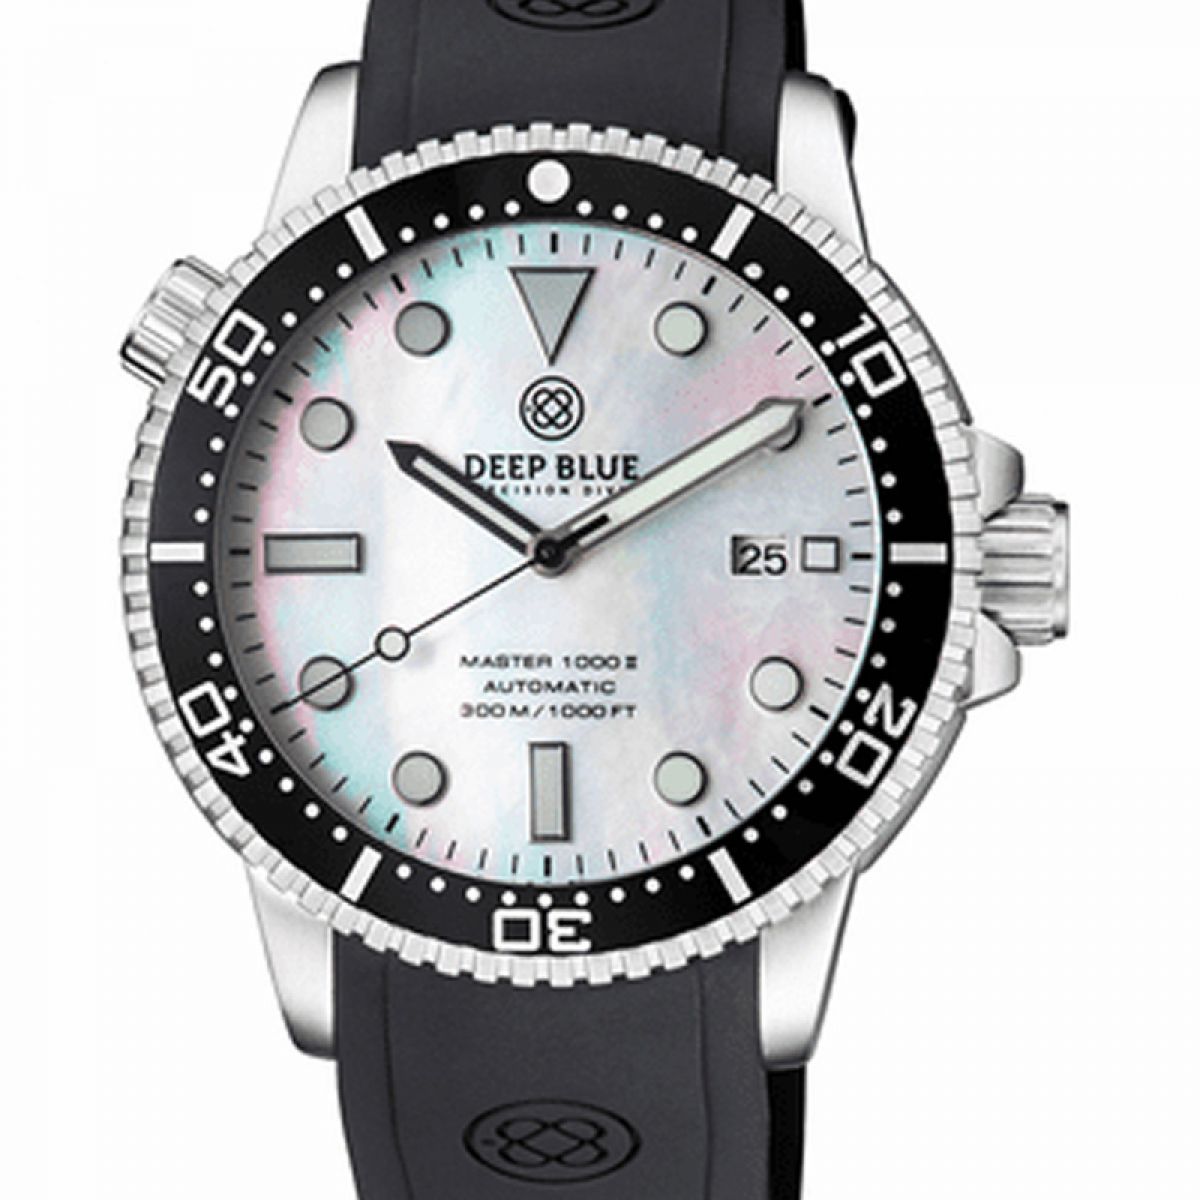 MASTER 1000 II 44MM AUTOMATIC DIVER BLACK CERAMIC BEZEL -WHITE MOTHER OF PEARL DIAL